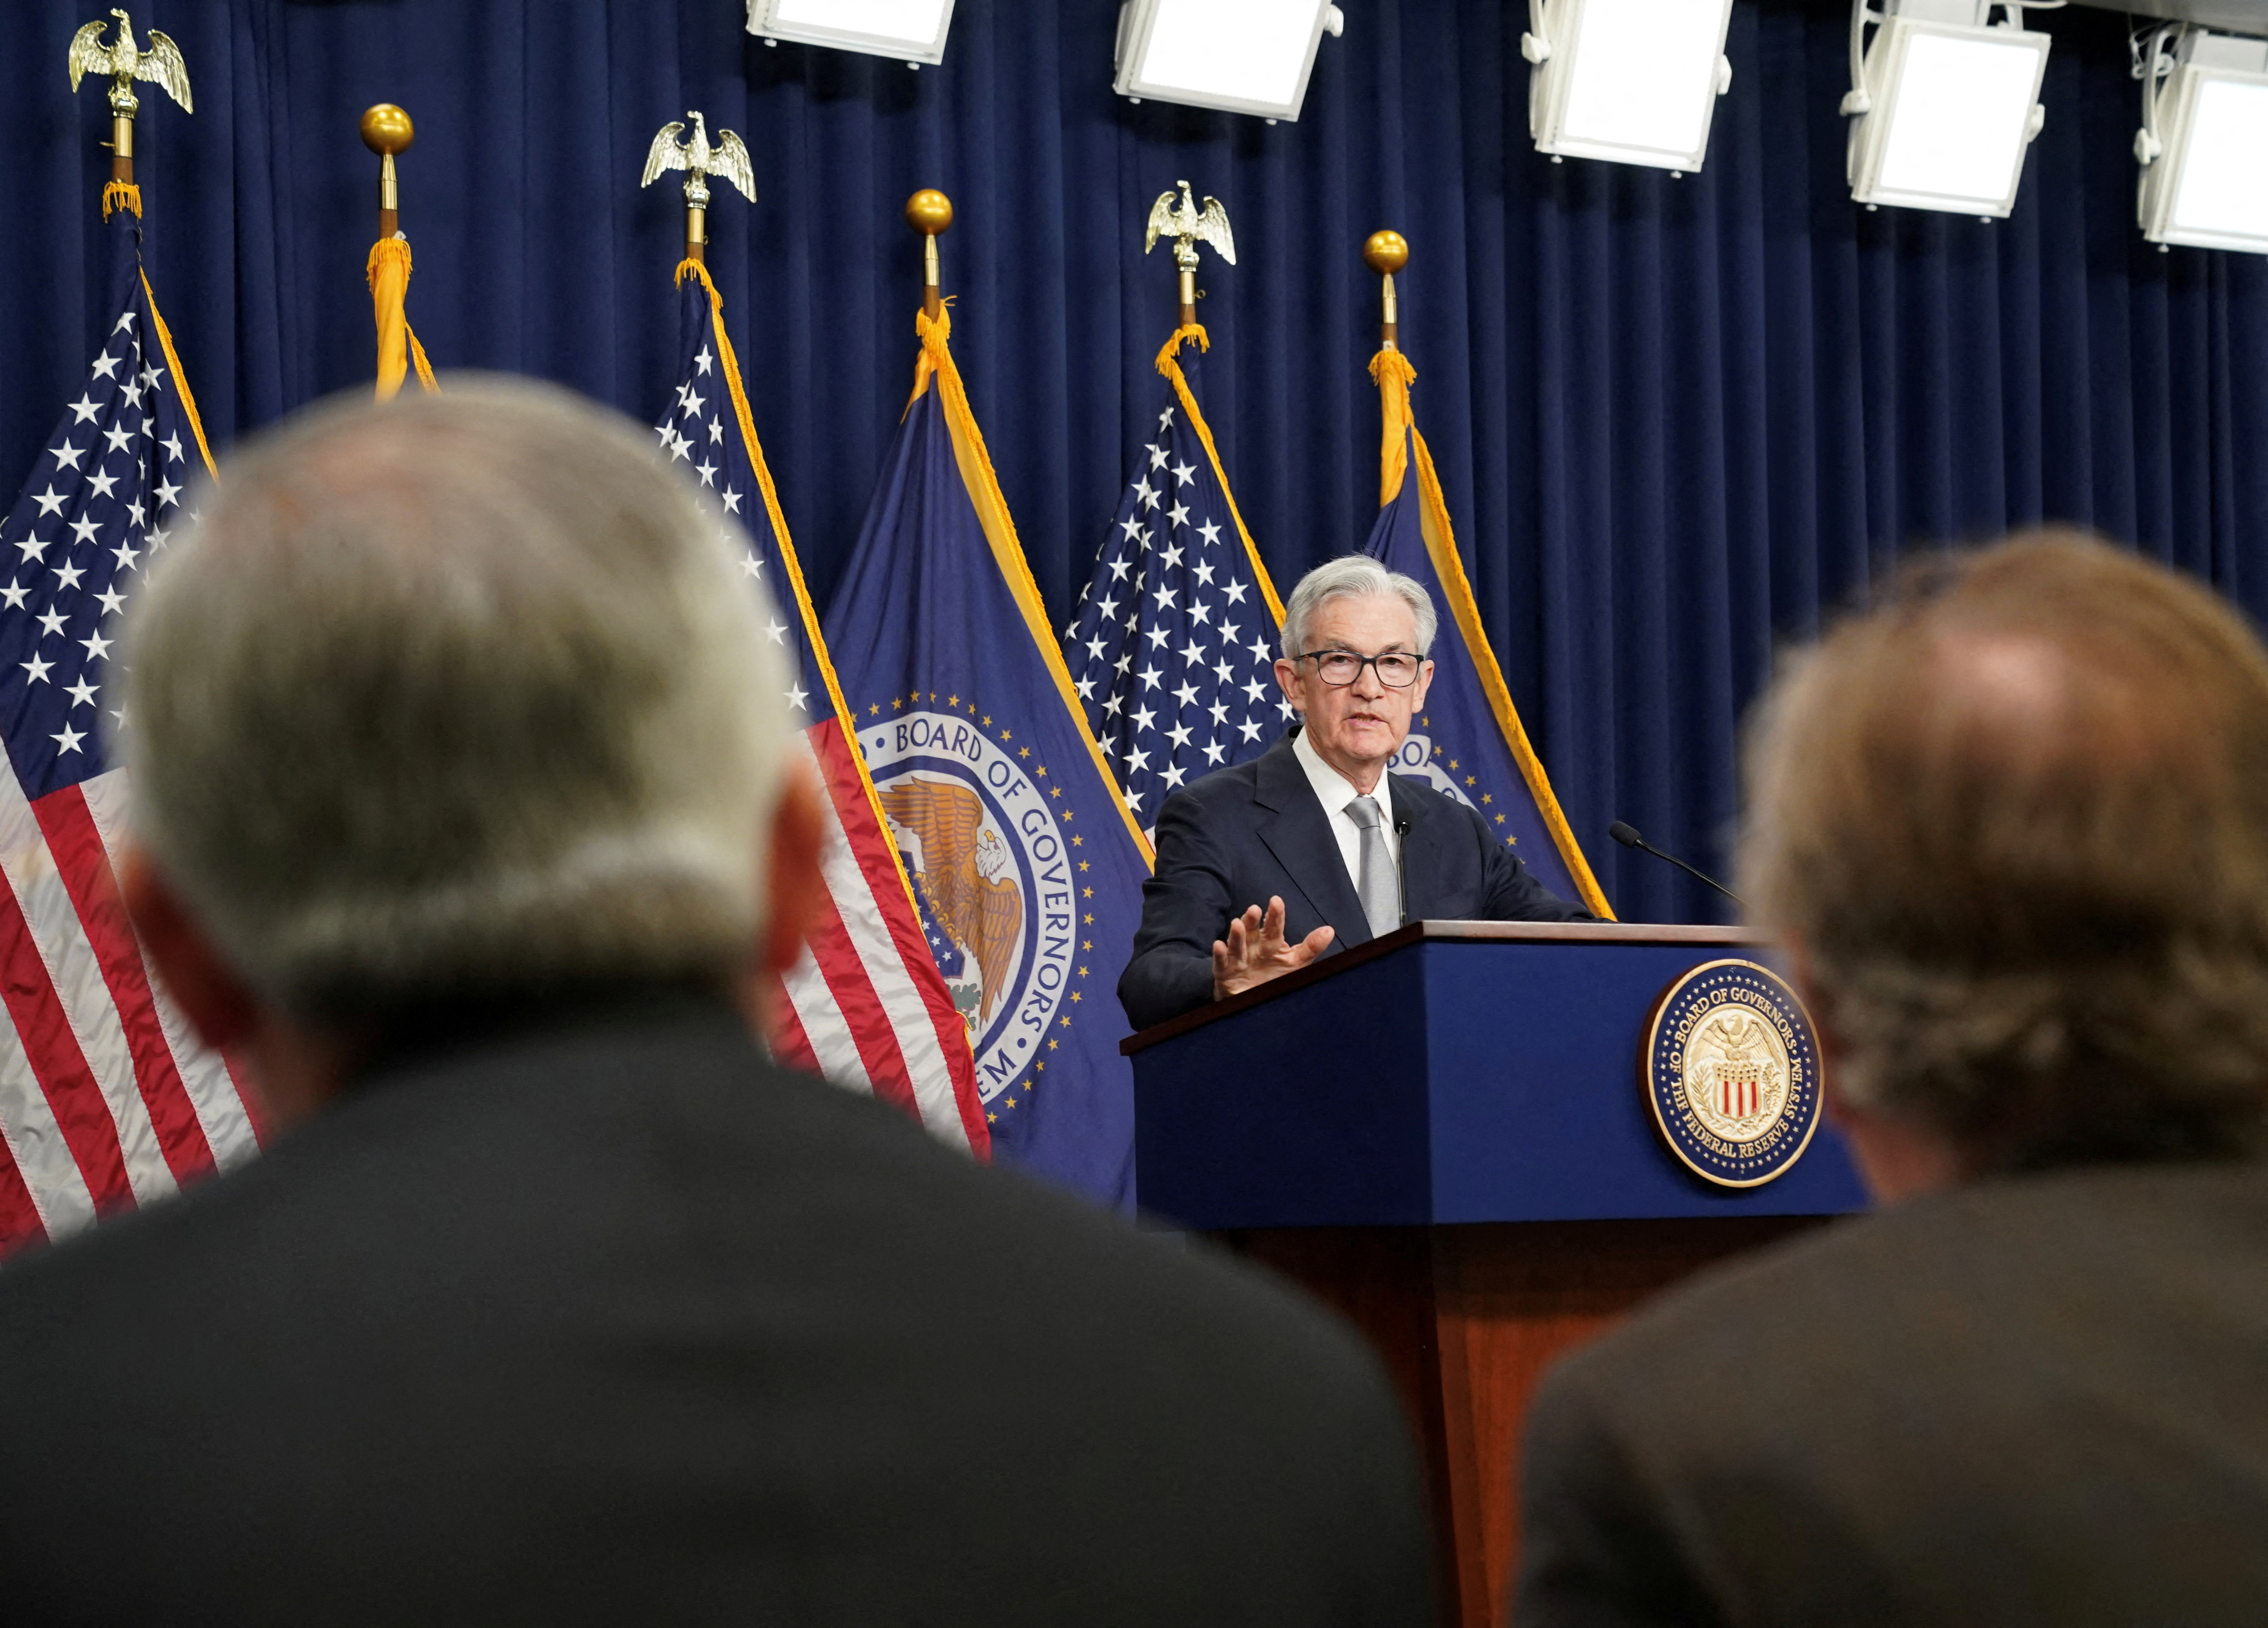 Federal Reserve Chairman Jerome Powell speaks at a press conference in Washington